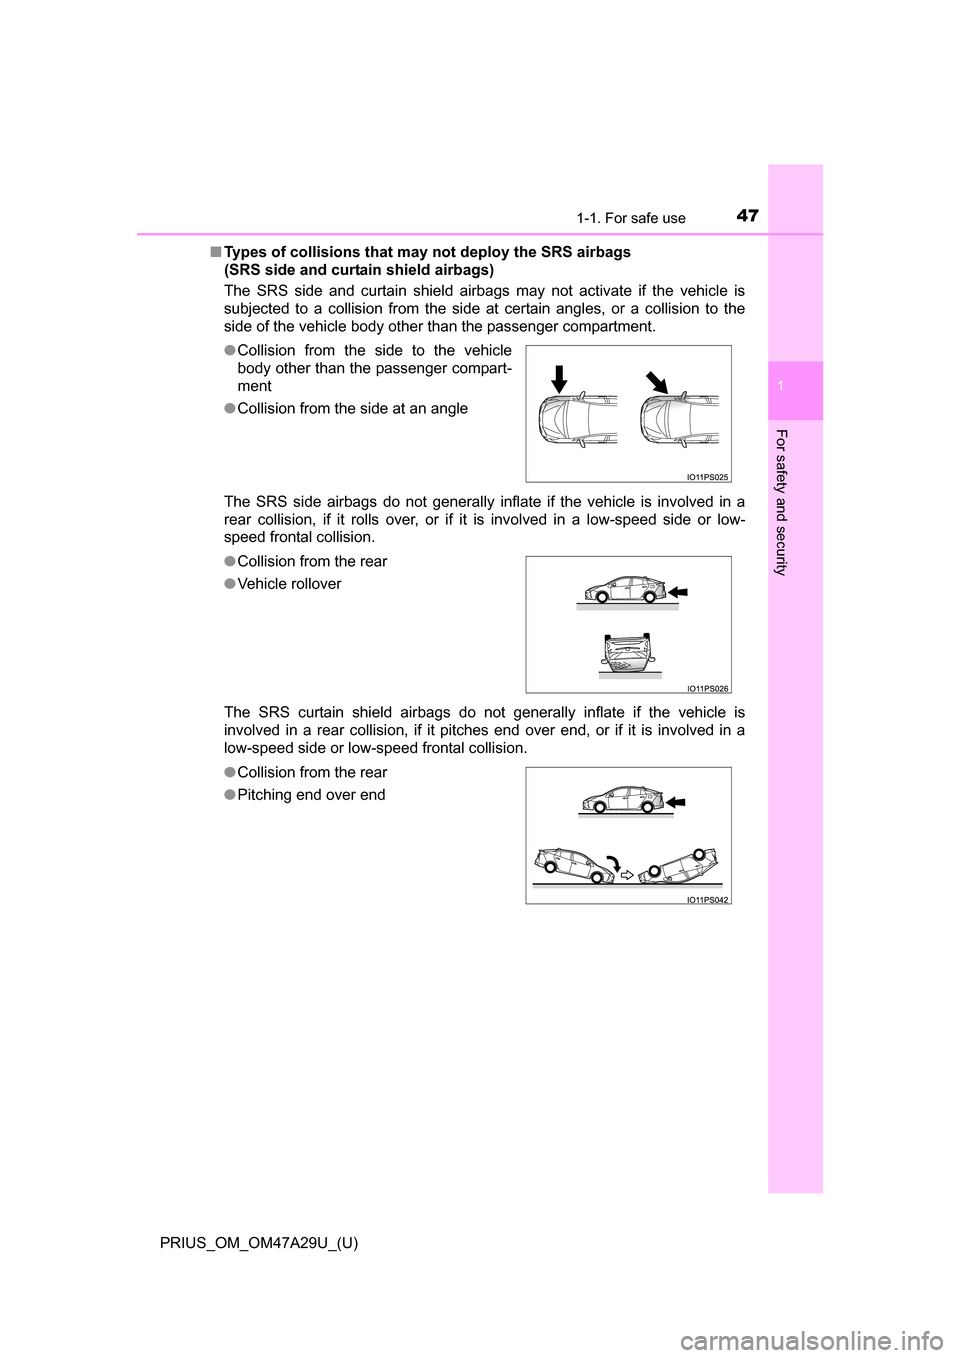 TOYOTA PRIUS 2016 4.G Service Manual 471-1. For safe use
PRIUS_OM_OM47A29U_(U)
1
For safety and security
■Types of collisions that may not deploy the SRS airbags 
(SRS side and curtain shield airbags)
The SRS side and curtain shield ai